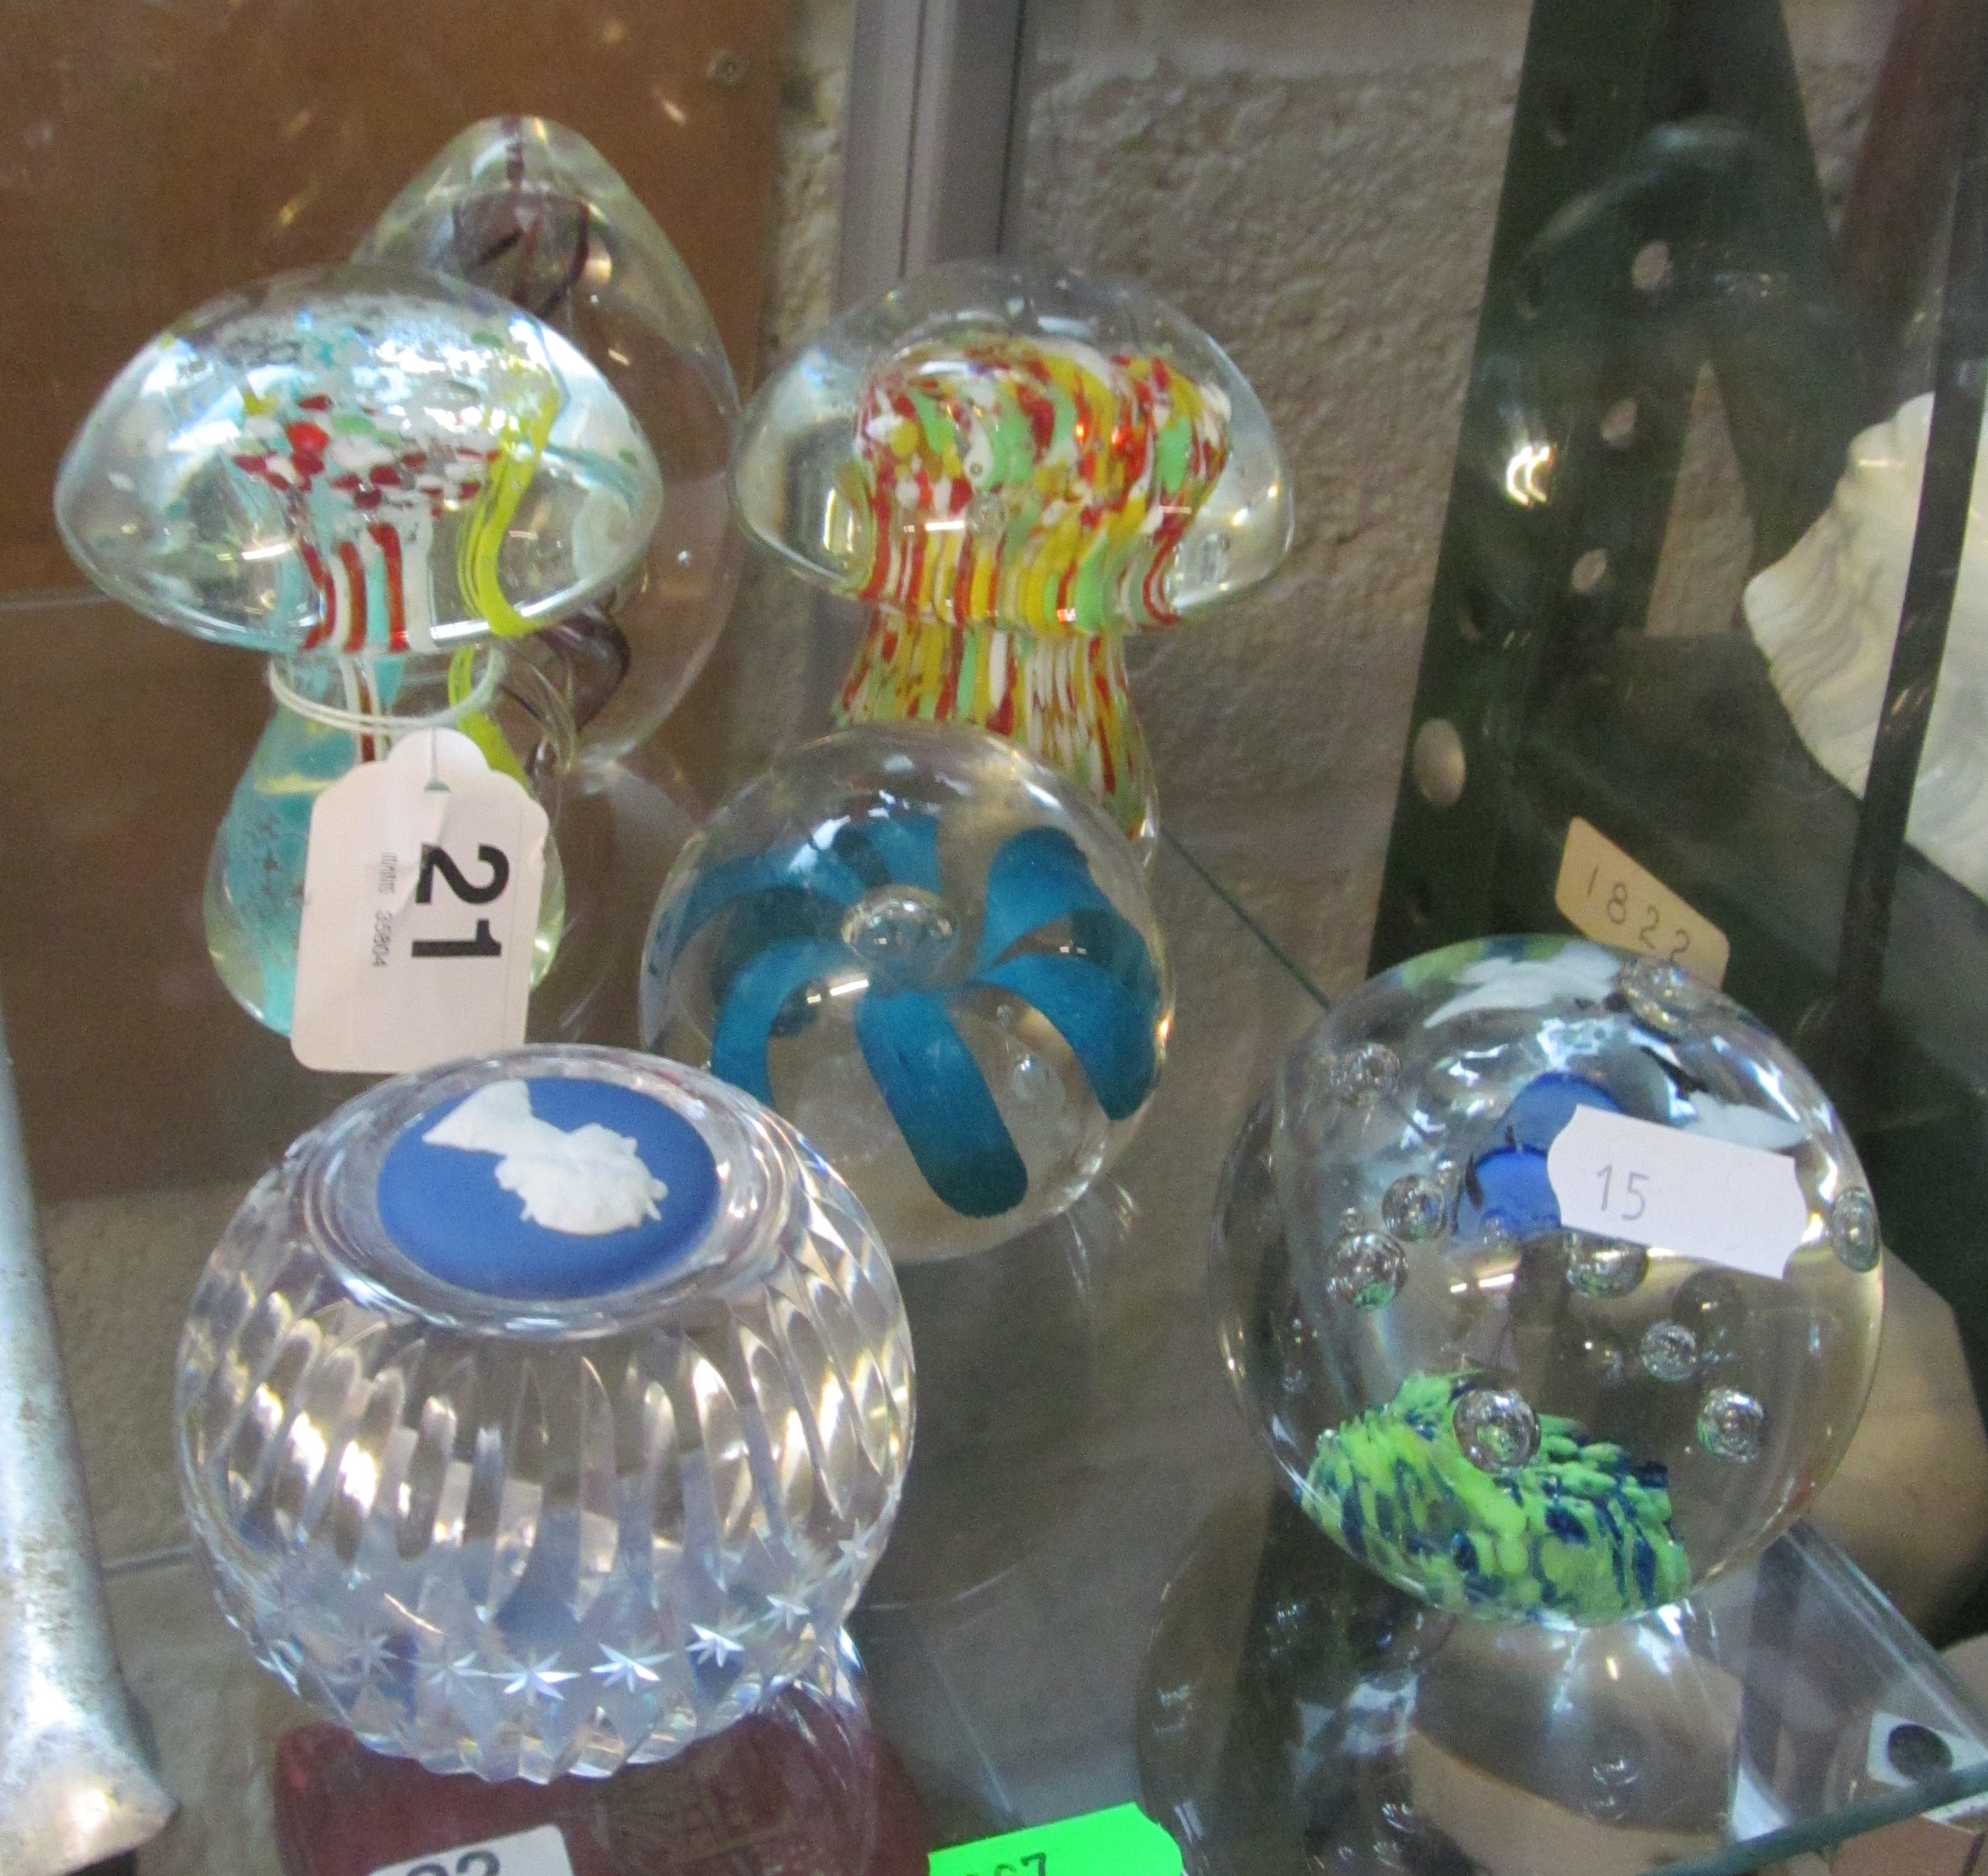 Six paperweights